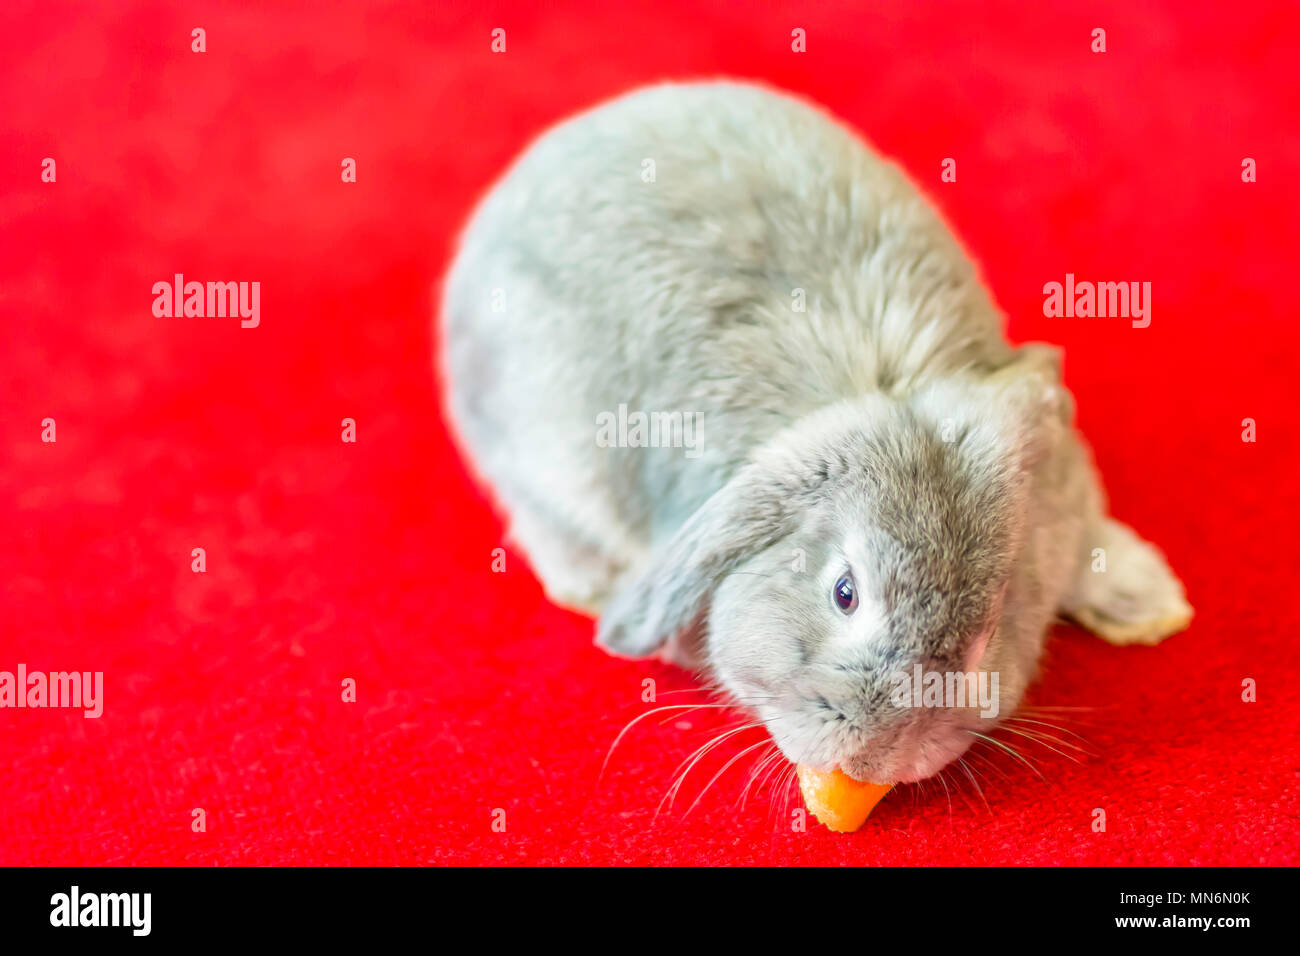 Grey rabbit eating carrot on red carpet.Cute and fluffy animal at home.Pets uk.Silver long haired bunny on room floor.Funny animals.Adorable pet Uk. Stock Photo